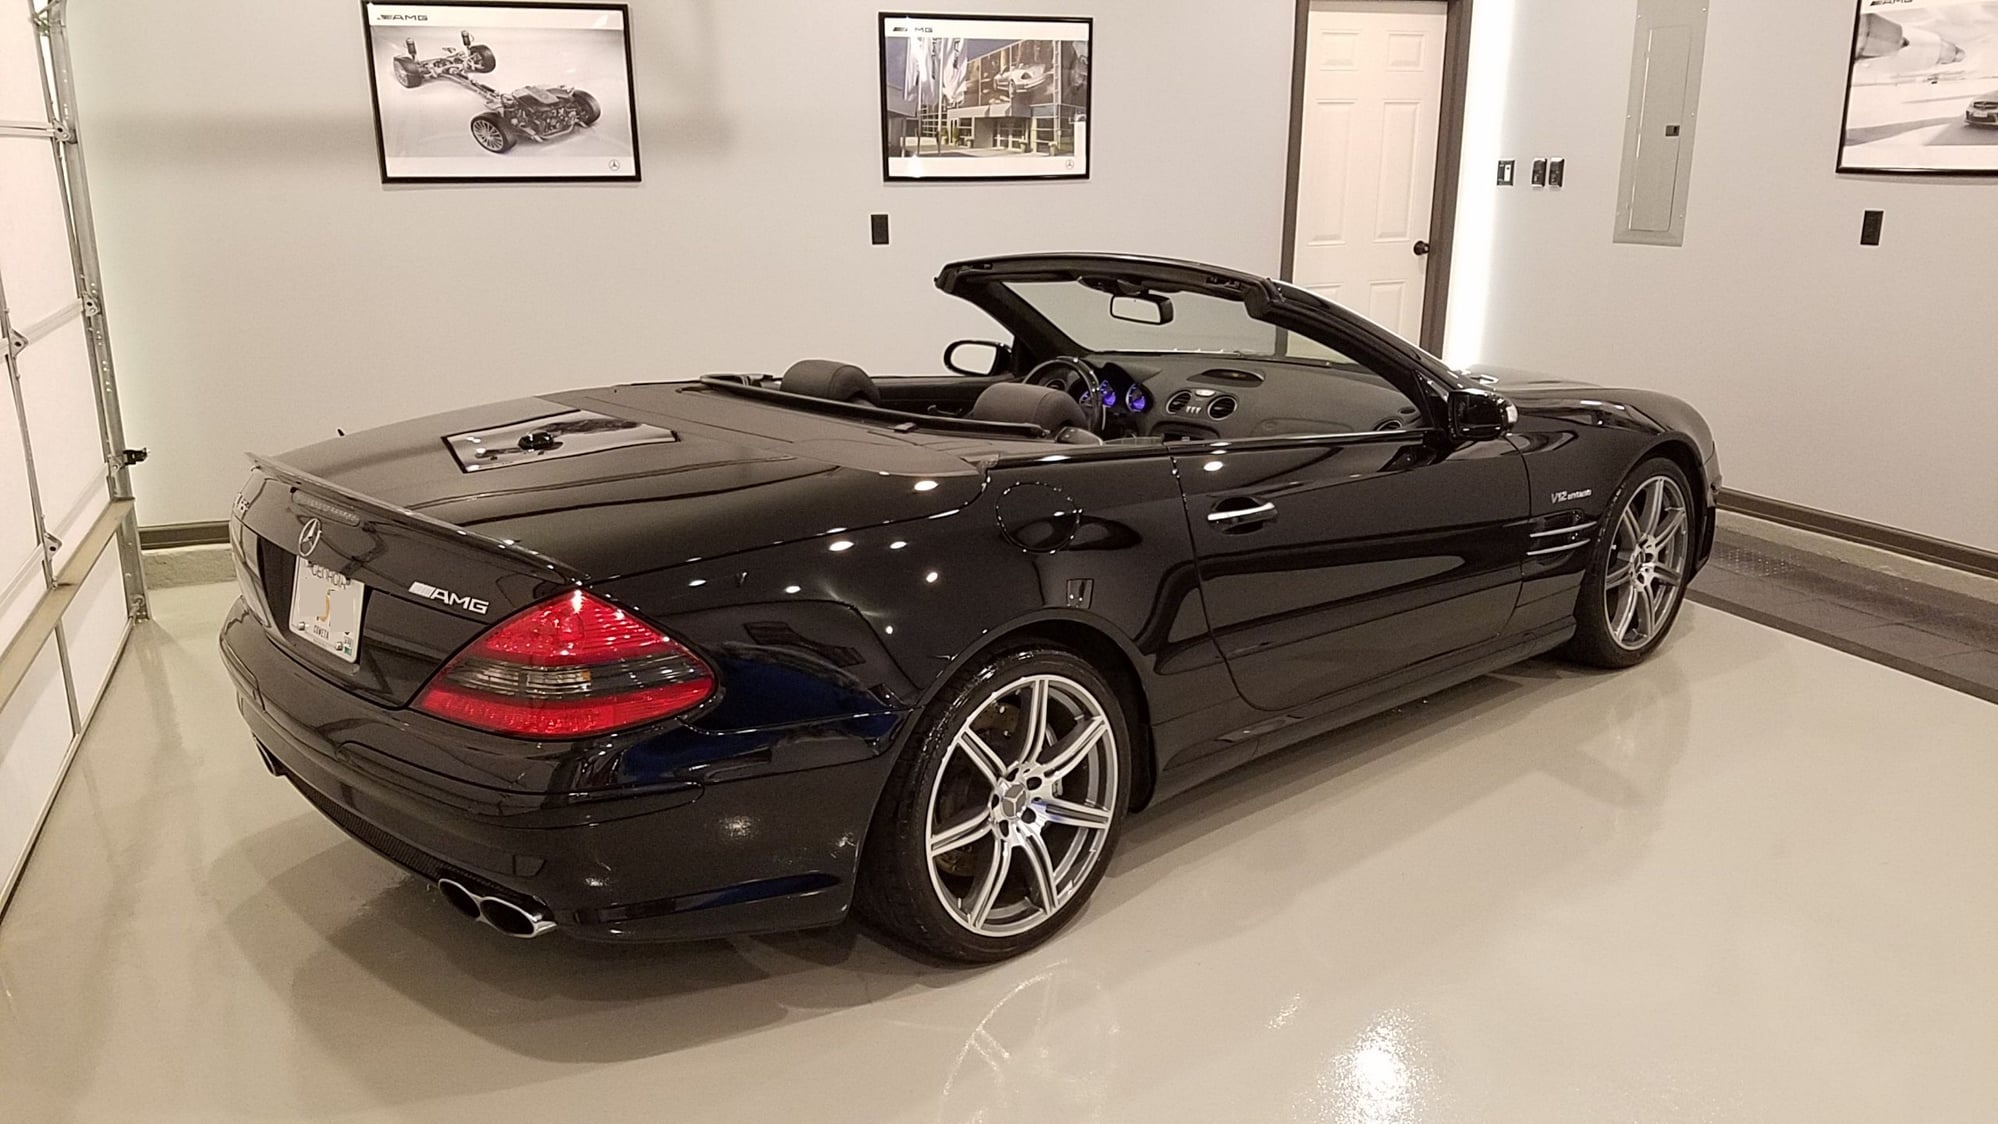 2008 Mercedes-Benz SL65 AMG - 2008 SL65 AMG - Great deal for a great car - Used - VIN WDBSK79F68F139401 - 98,000 Miles - 12 cyl - 2WD - Automatic - Convertible - Black - Ann Arbor, MI 48103, United States